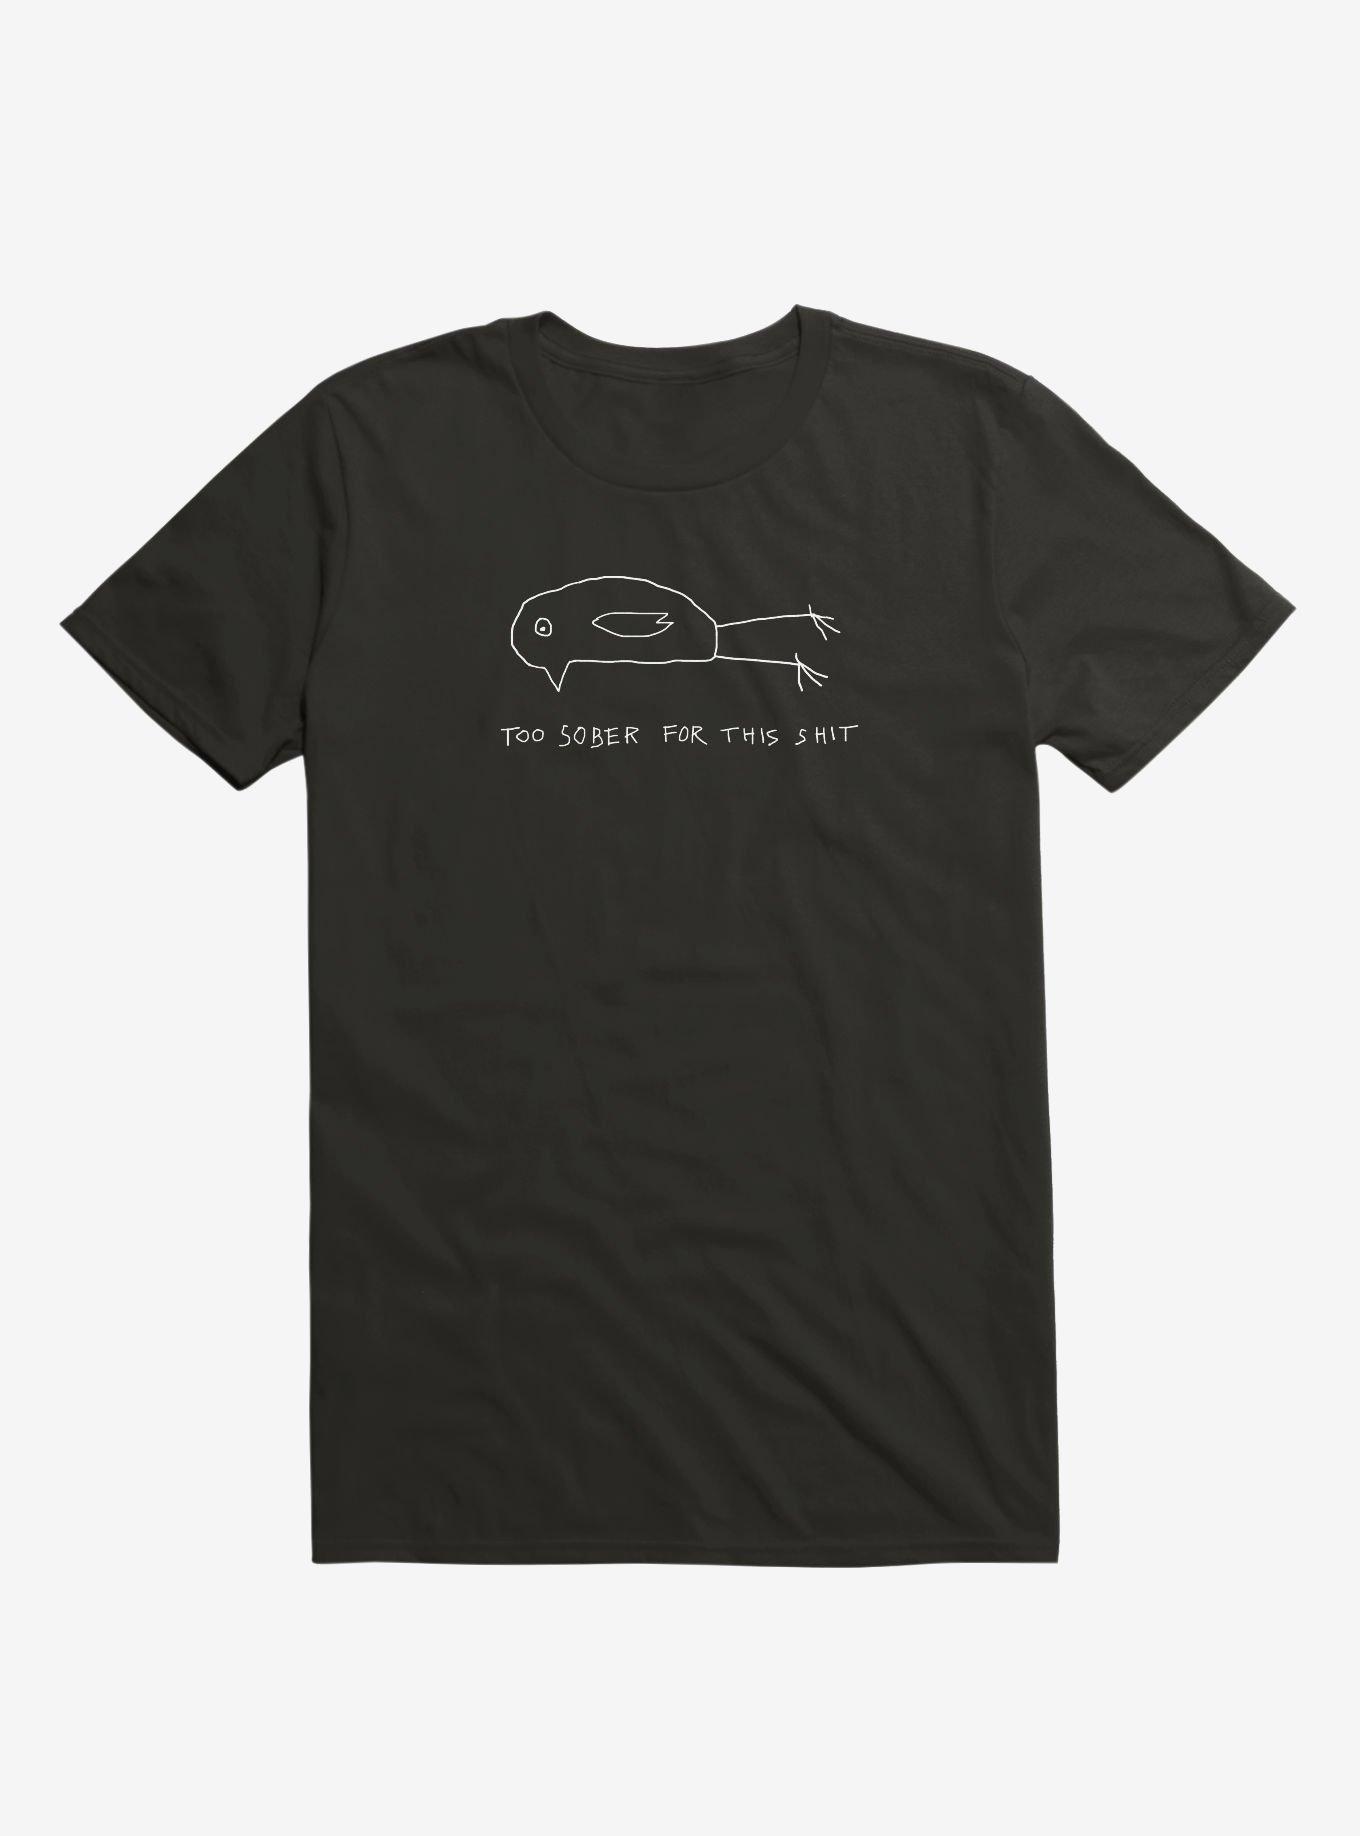 Too Sober For This Shit T-Shirt, BLACK, hi-res